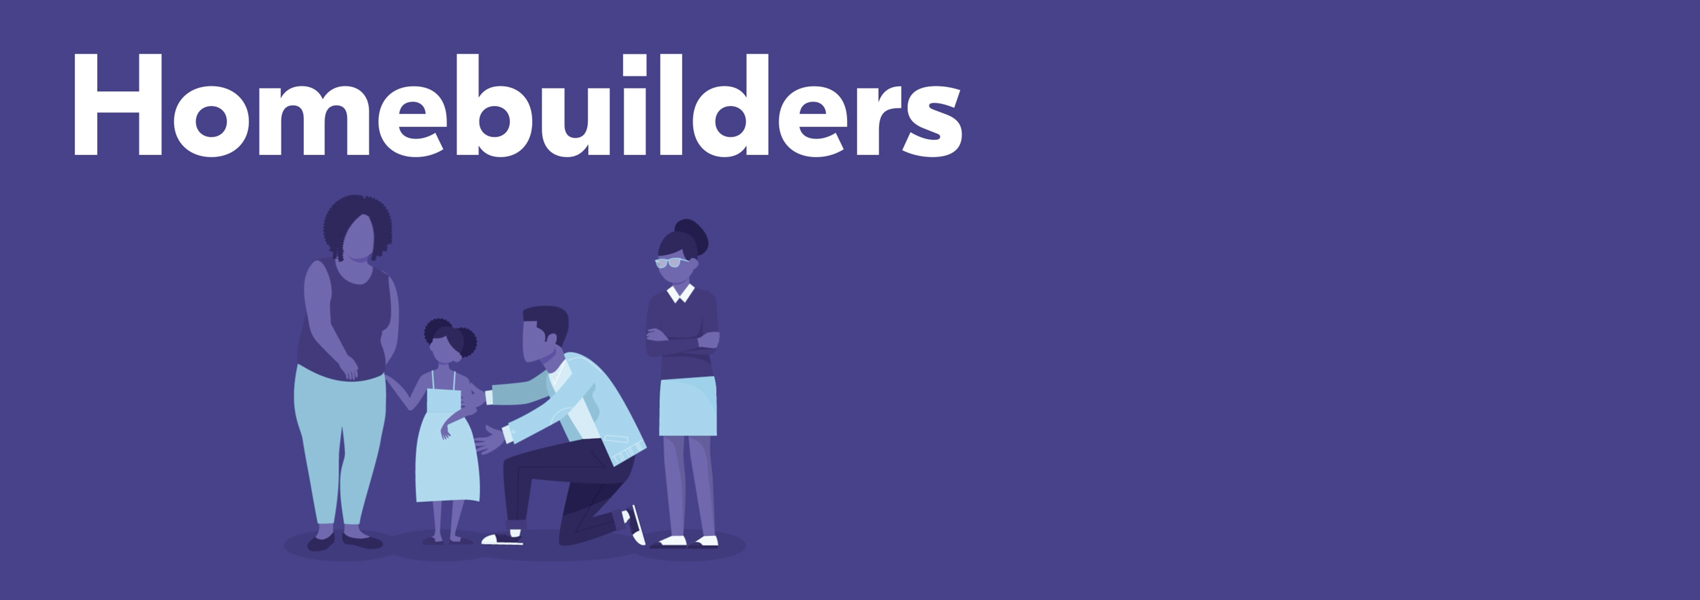 An illustrated image of a family with two children under the Homebuilders heading